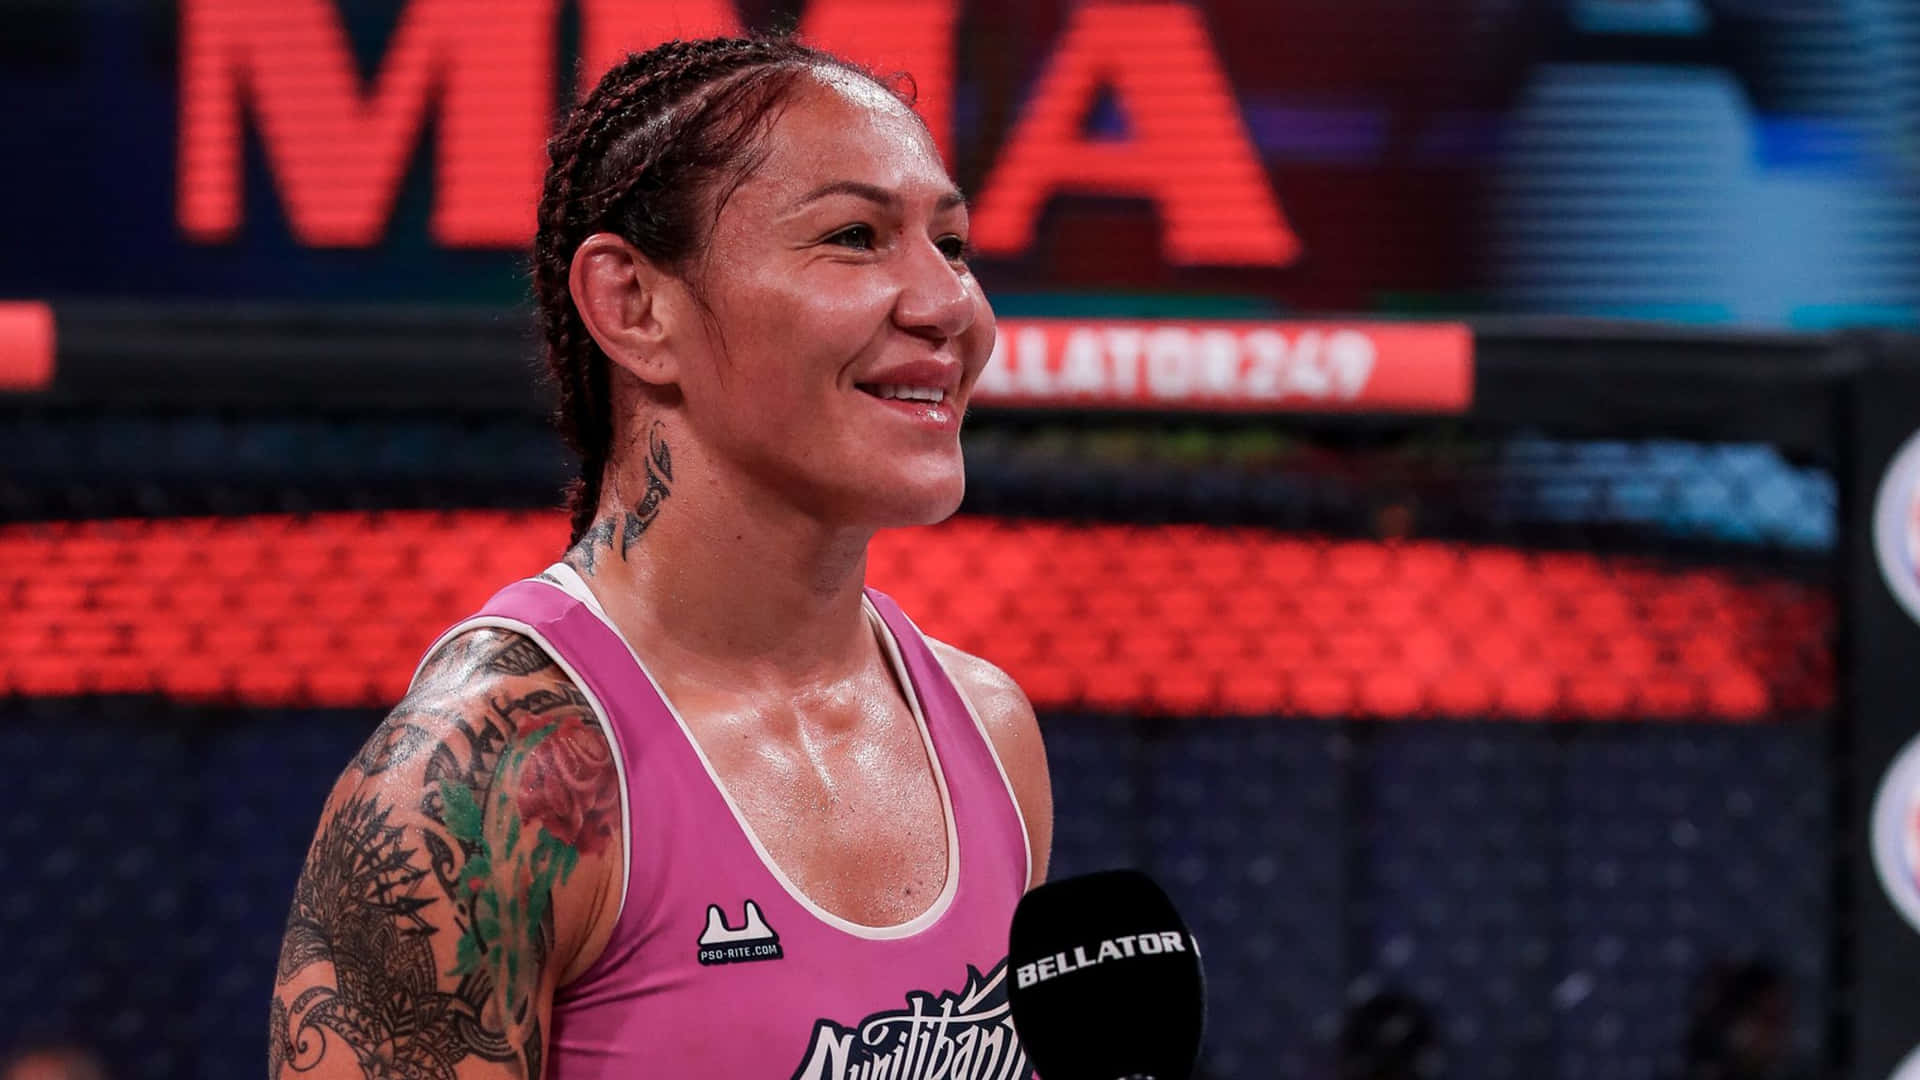 Caption: Empowering Smile of Cris Cyborg, the American UFC Athlete Wallpaper